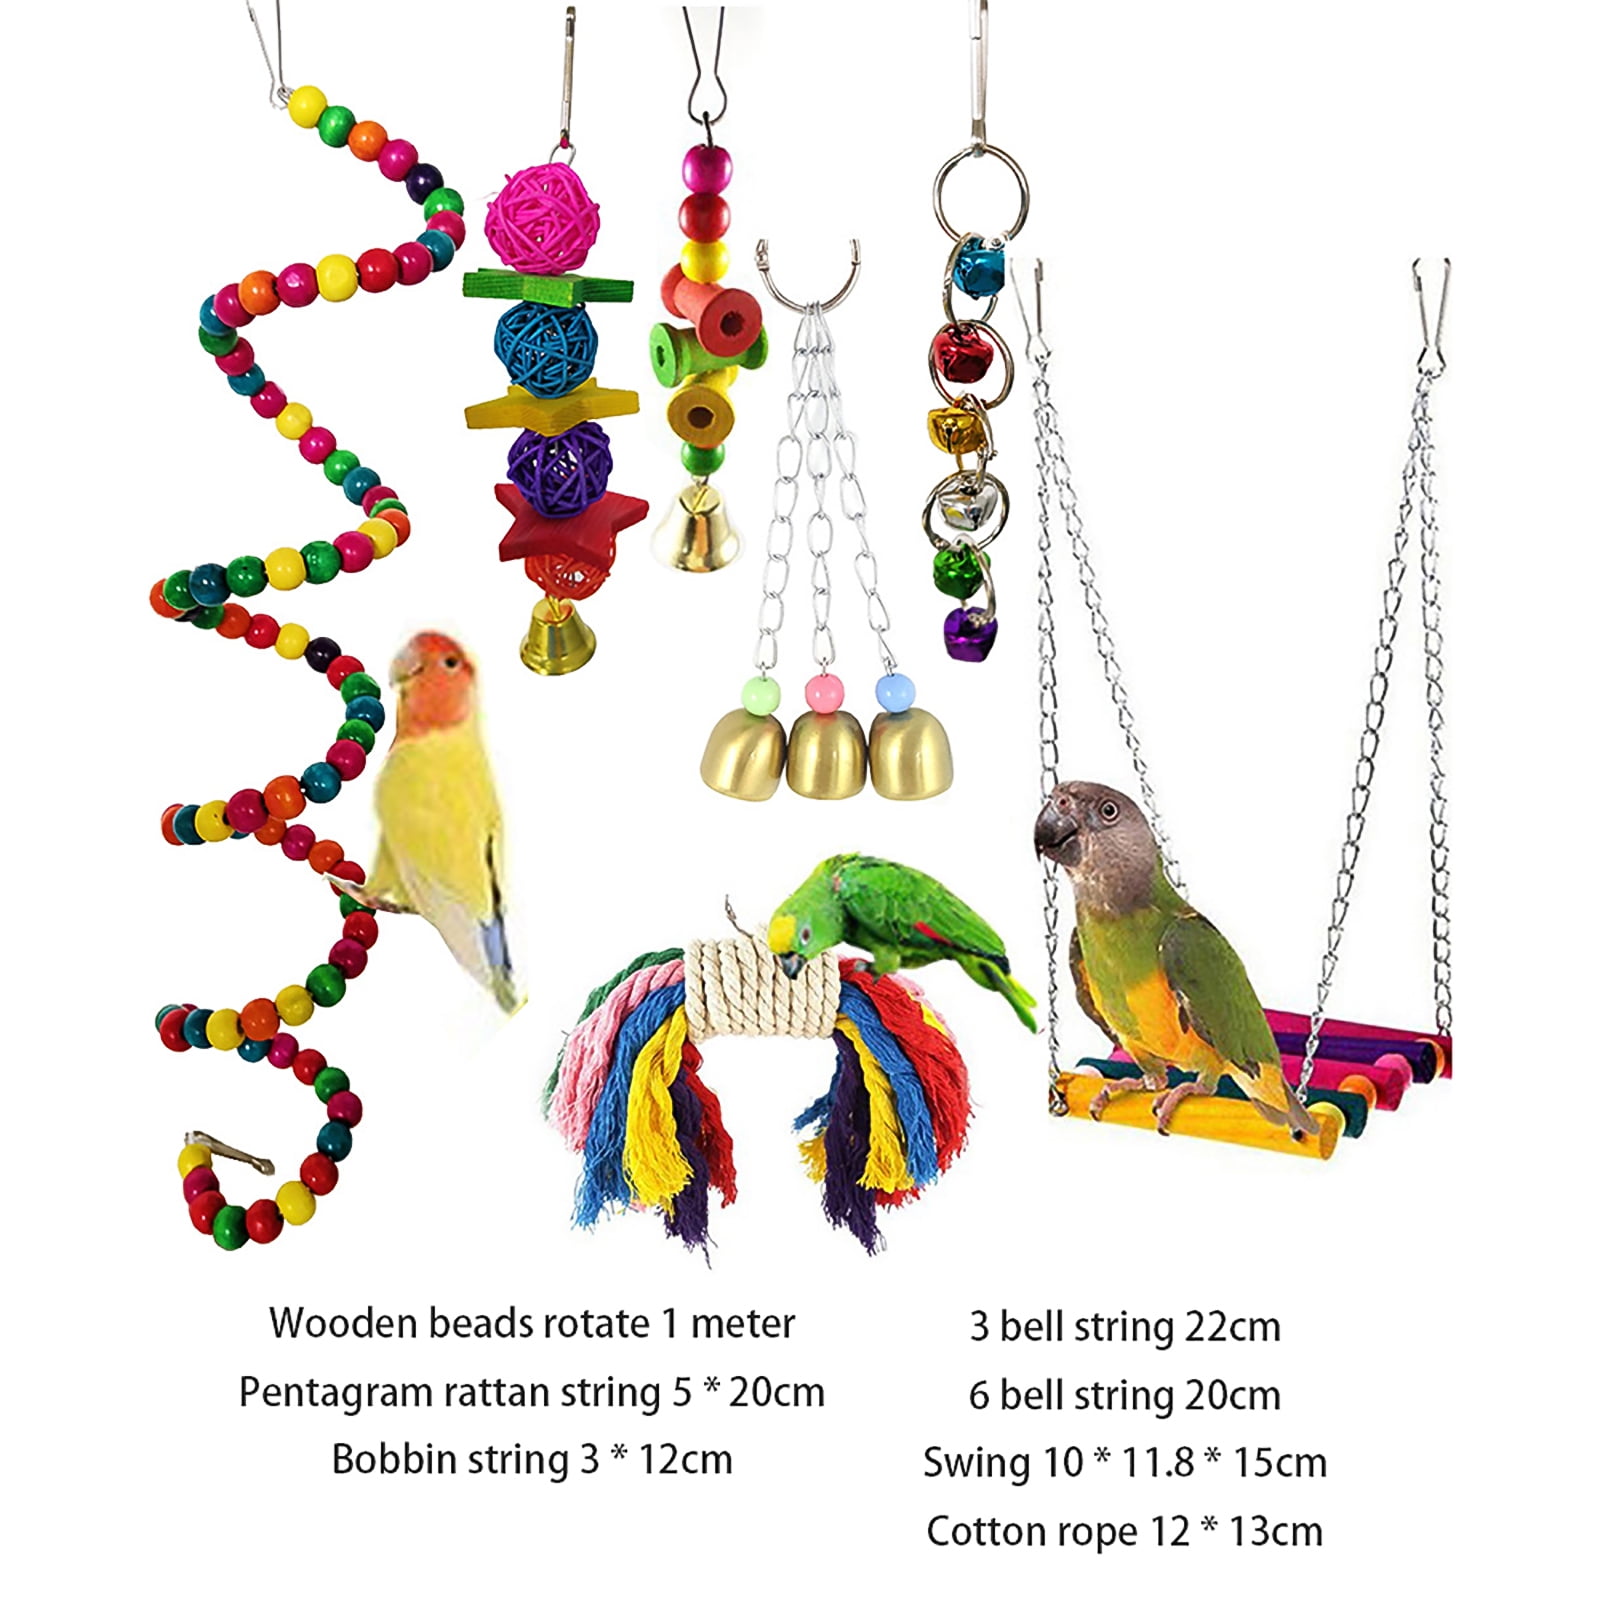 Love Birds Cockatiels Parrots 8 Pcs Bird Swing Chewing Toys- Parrot Hammock Bell Toys Suitable for Small Parakeets Conures,Finches,Budgie,Macaws